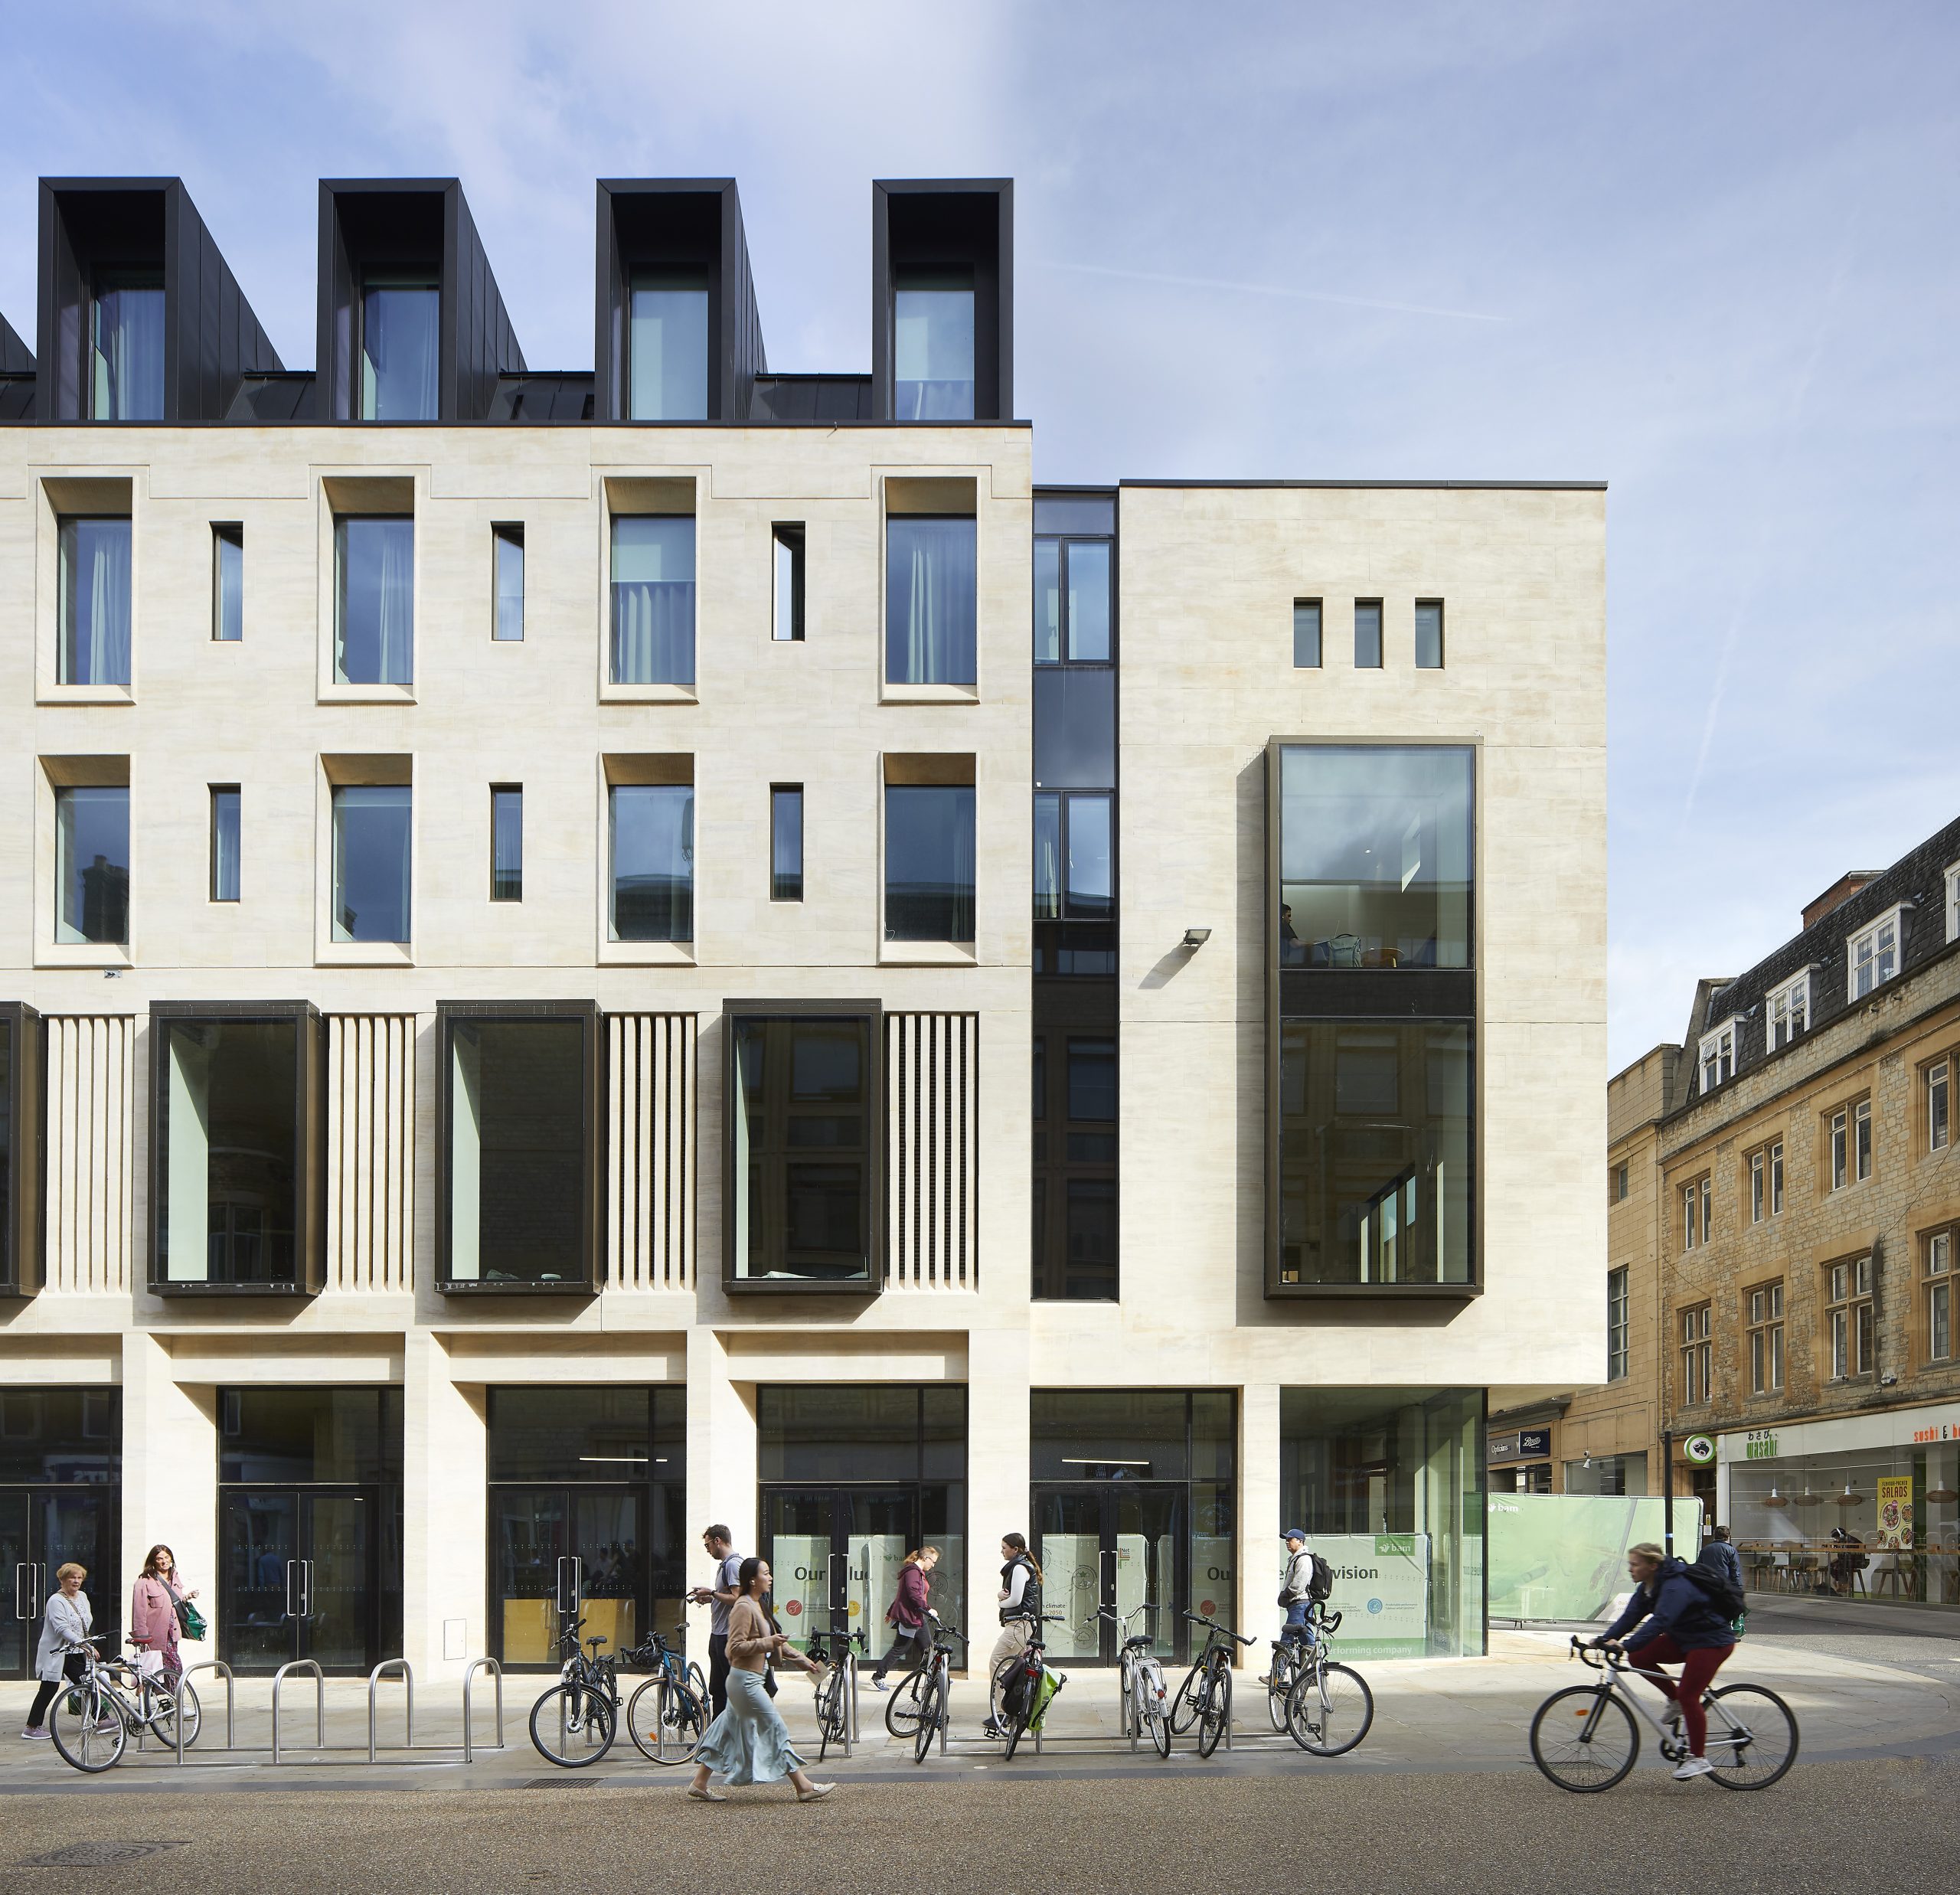 The Cornmarket facade of Jesus College's Cheng Yu Tung Building, designed by MICA Architects. Image shows corner of pale cream stone building with multiple windows and people walking along at ground level Credit: Hufton + Crow